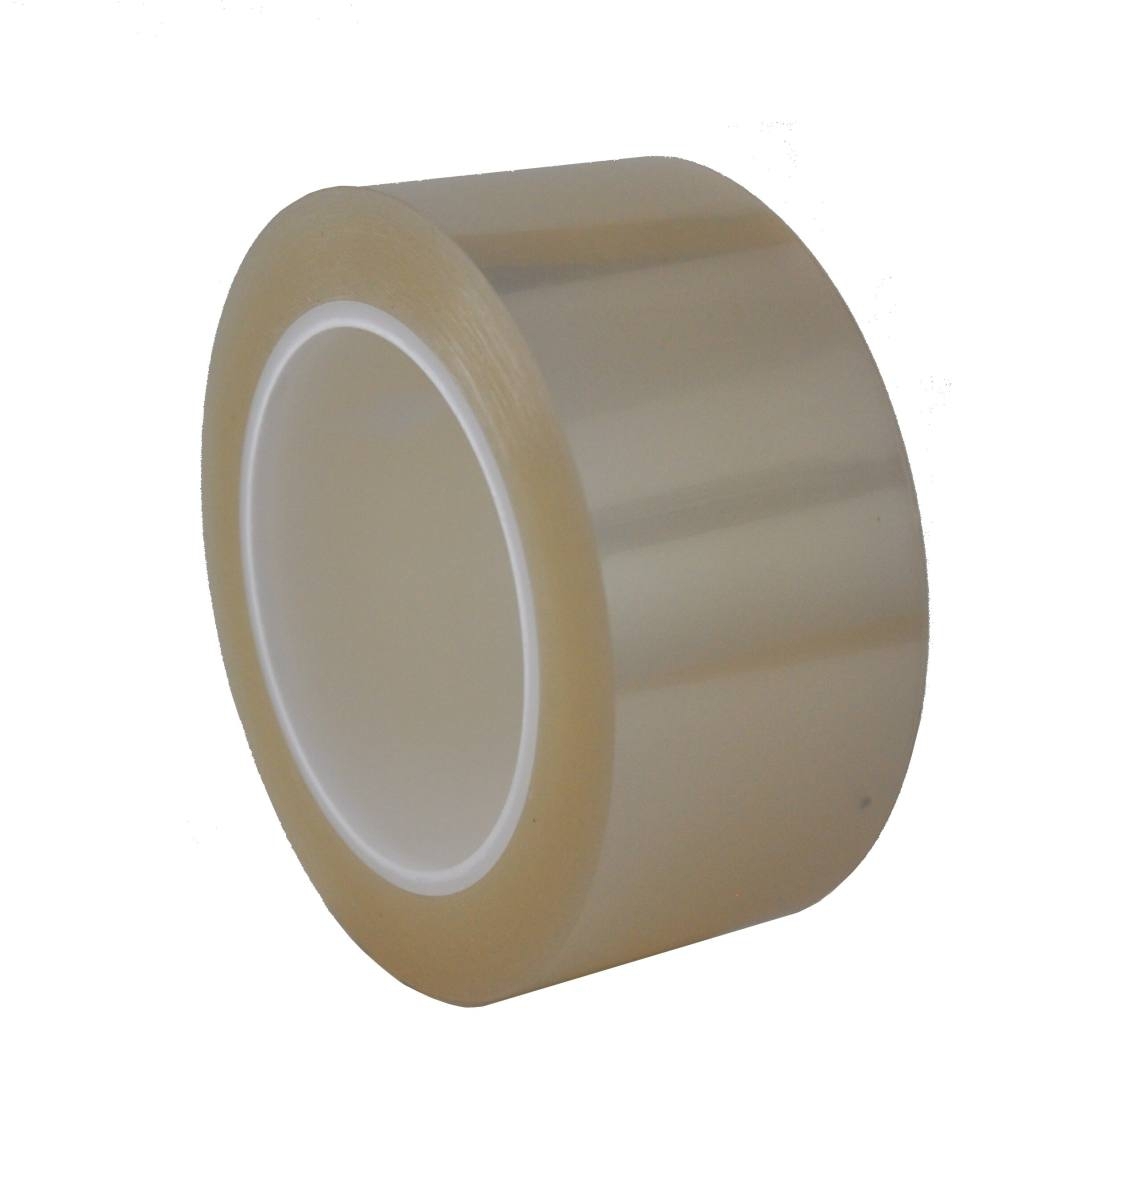 SKS fluorosilicone film, polyester film 0.075mm, 350mmx100m, coated on one side with fluorosilicone, transparent